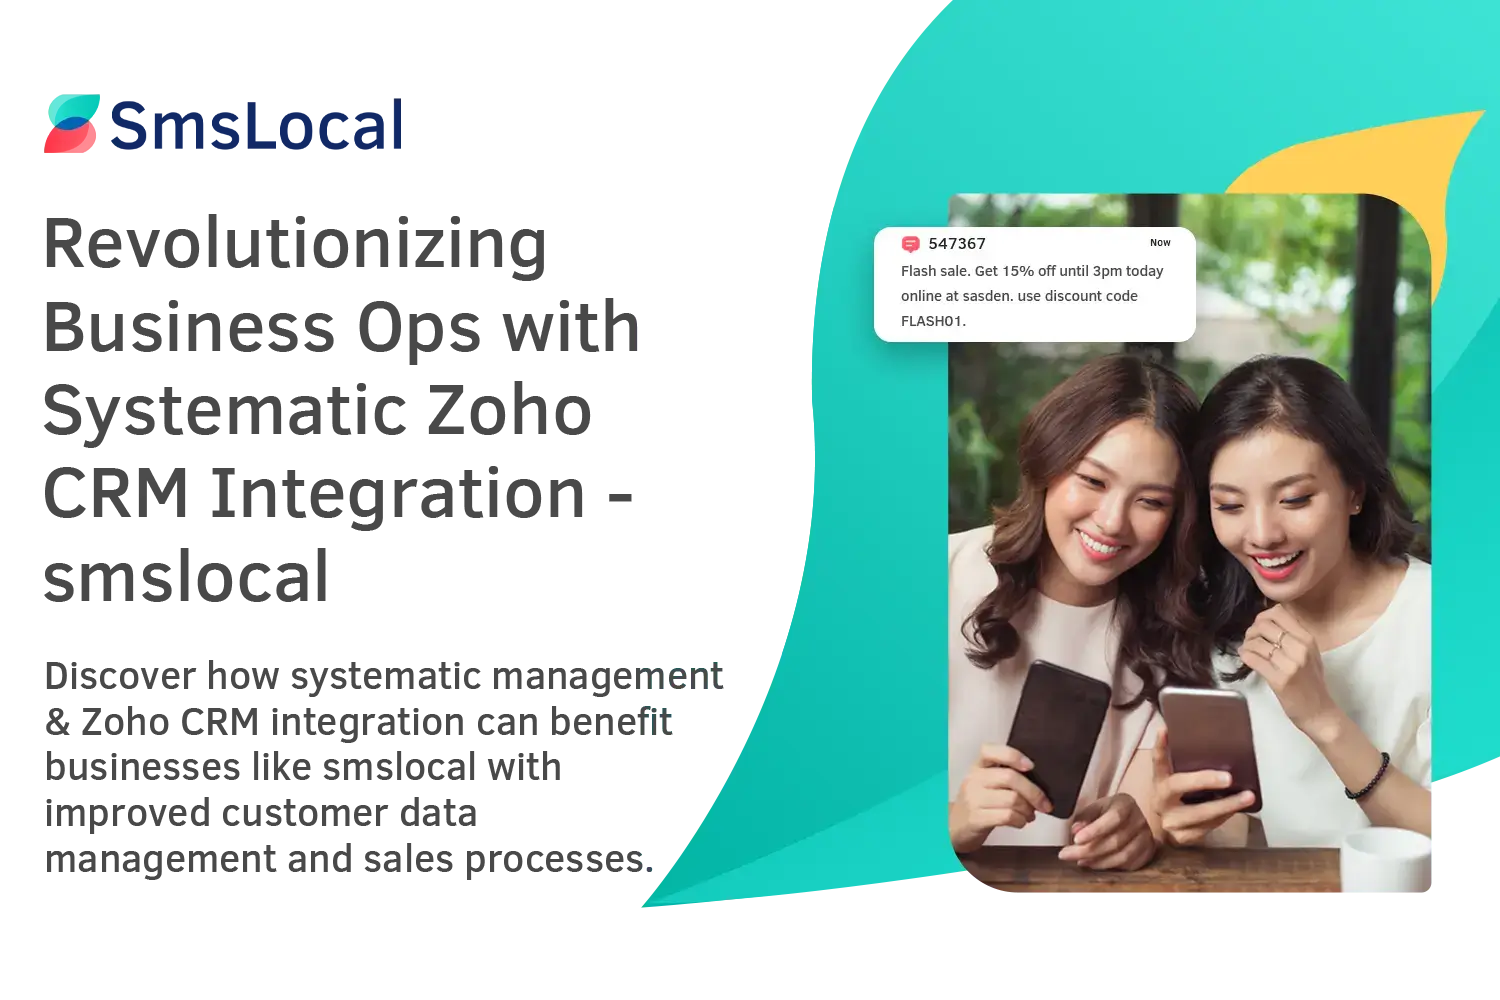 Revolutionizing-Business-Ops-with-Systematic-Zoho-CRM-Integration-smslocal-1-1 (1)